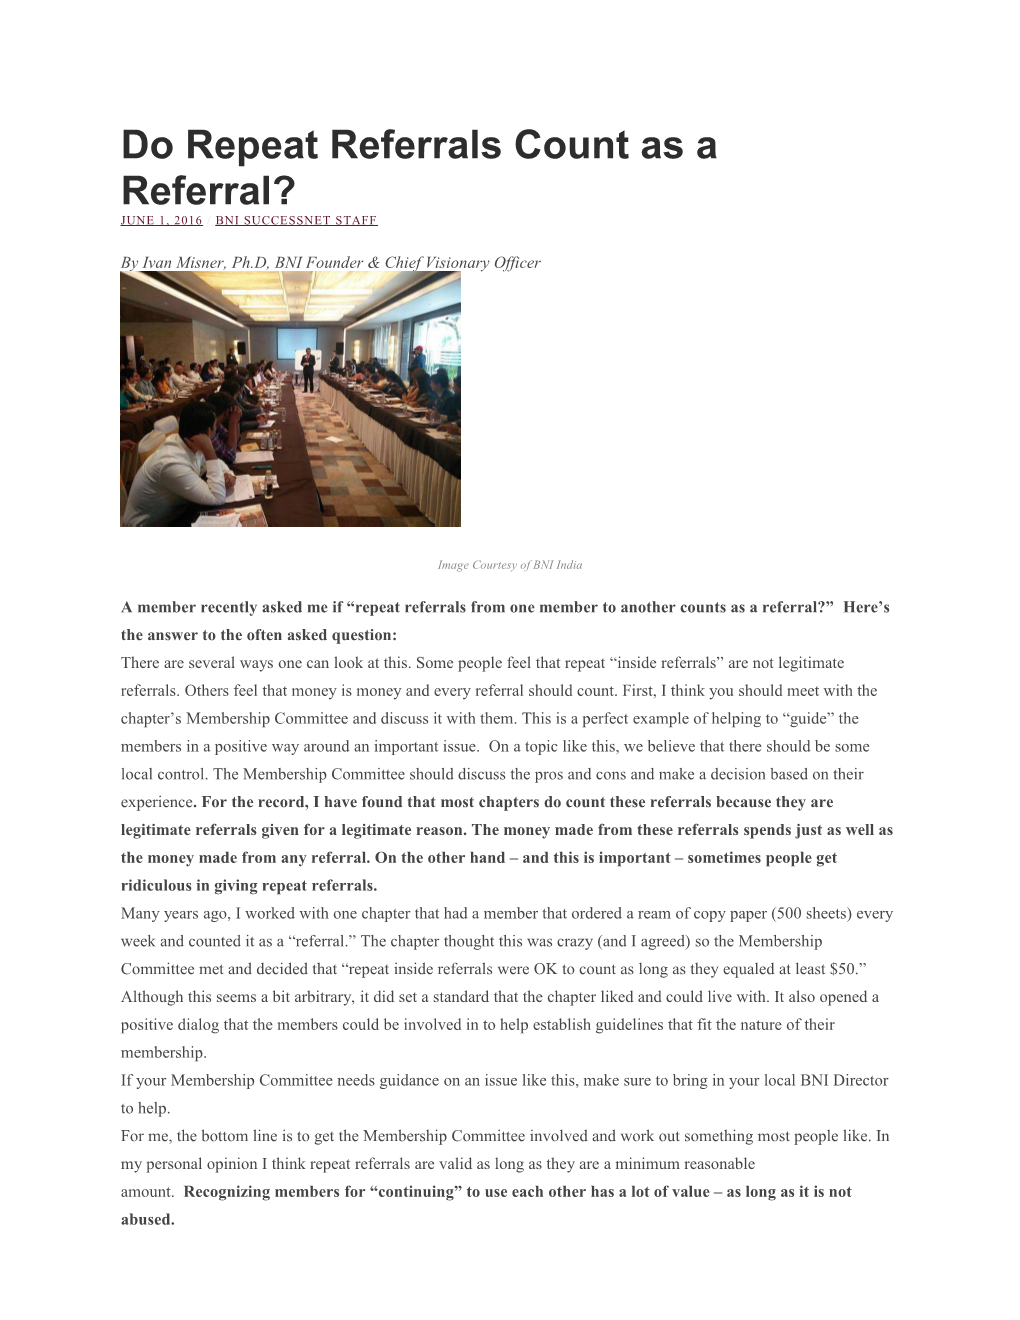 Do Repeat Referrals Count As a Referral?